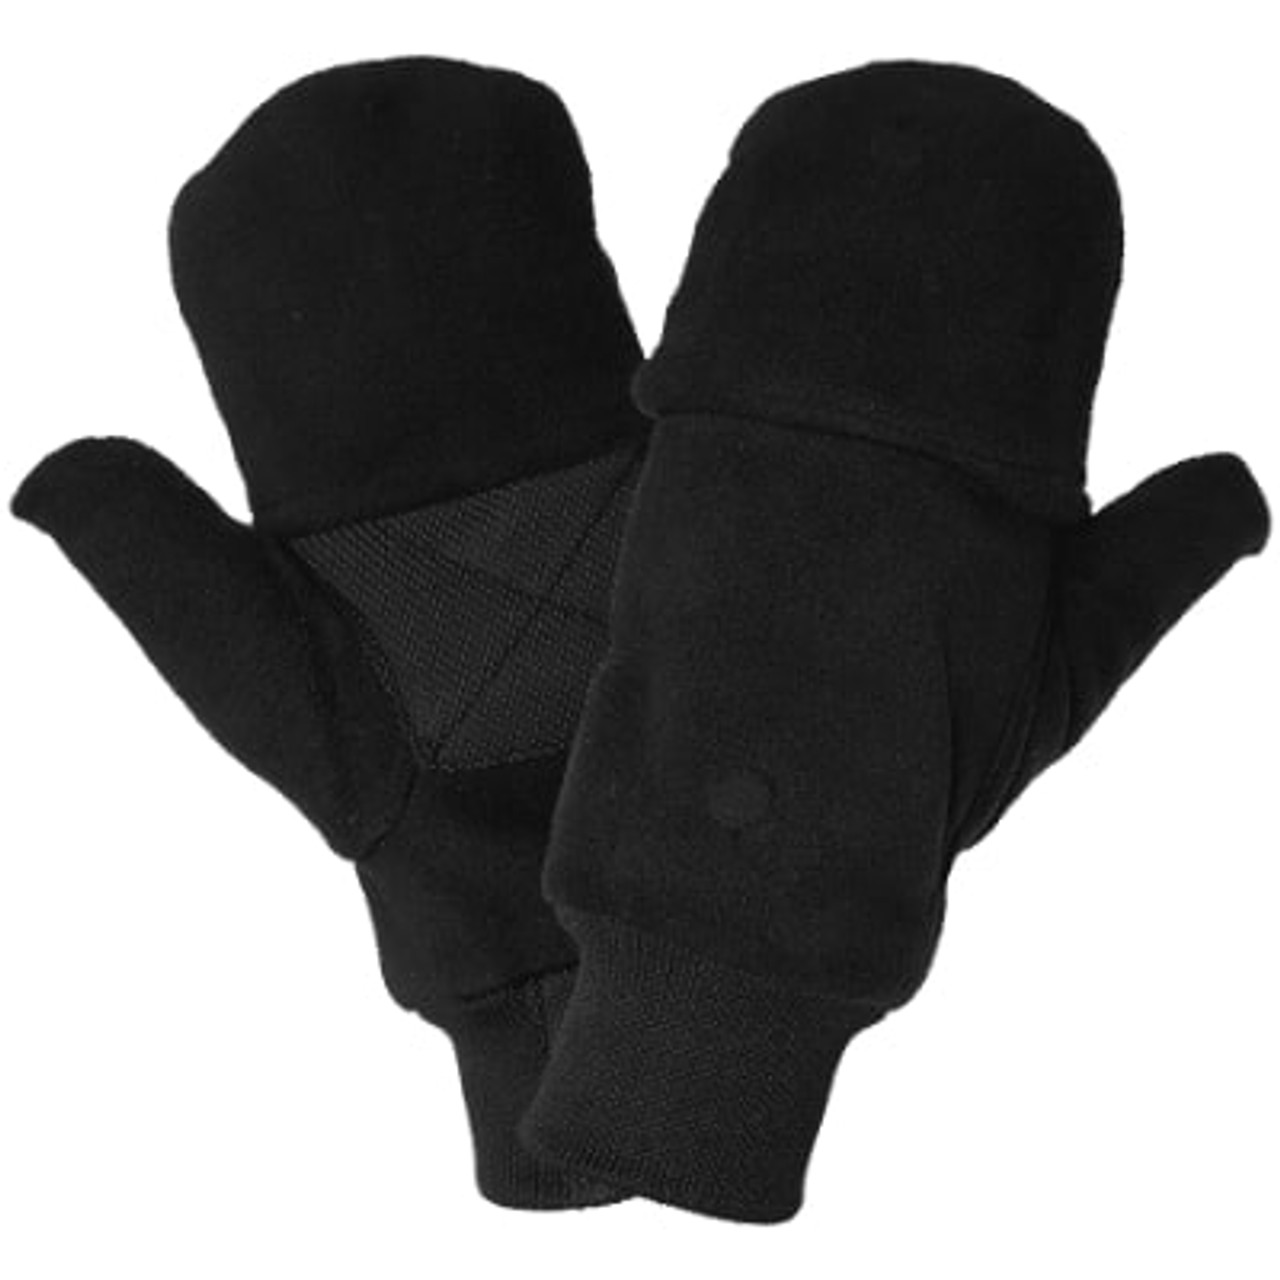  Ice Fishing Gloves - Winter Fishing Gloves - 3M Thinsulate Cold  Weather Convertible Mittens W/ Finger Flaps - Waterproof Fly Fishing Gloves  For Men & Women - Photography Gloves Cold Weather